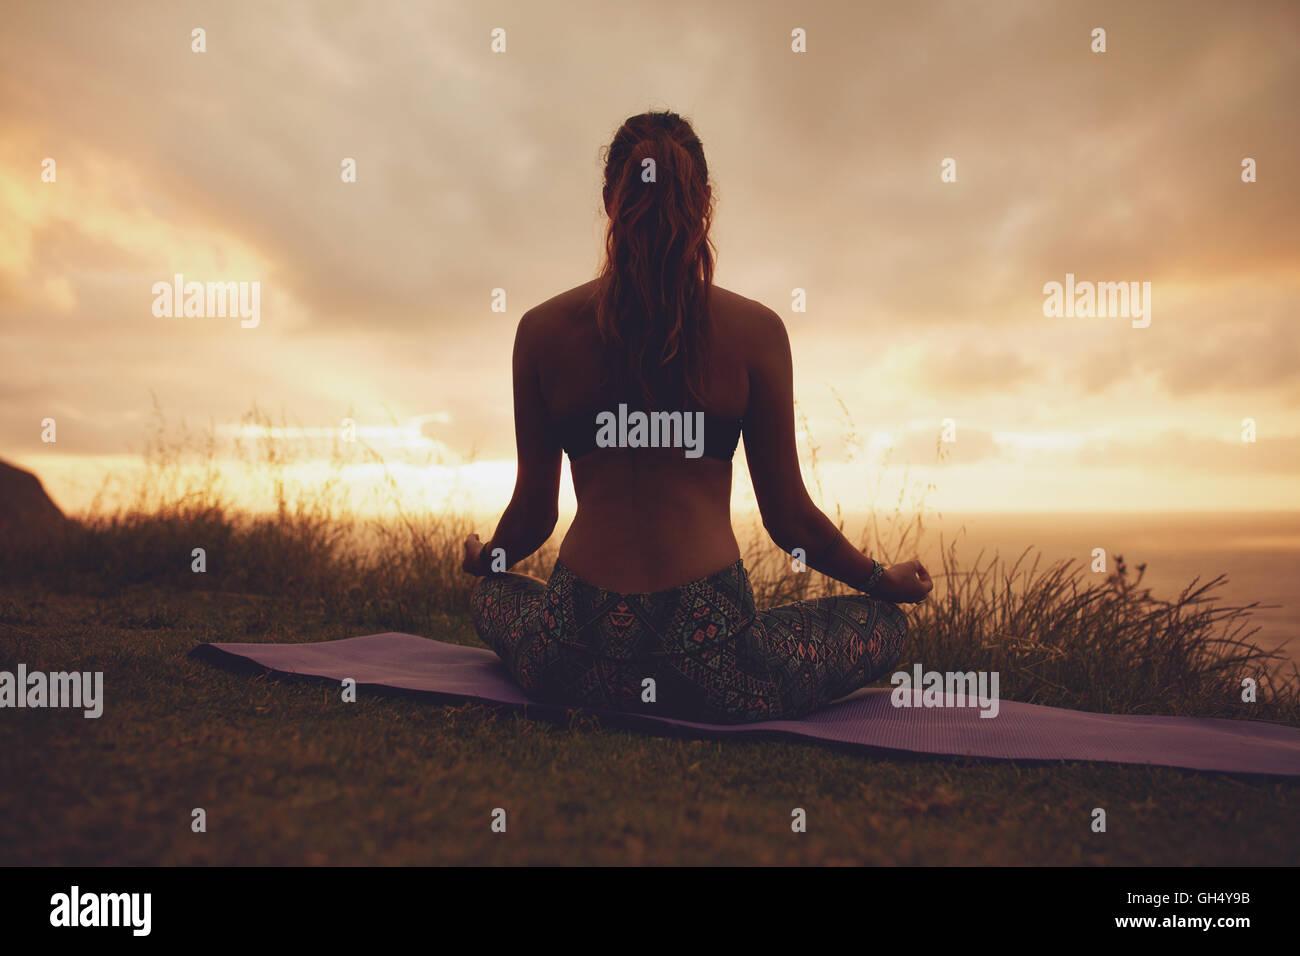 Silhouette rear view of young woman doing yoga meditation outdoors. fitness female model sitting on exercise mat in lotus yoga p Stock Photo